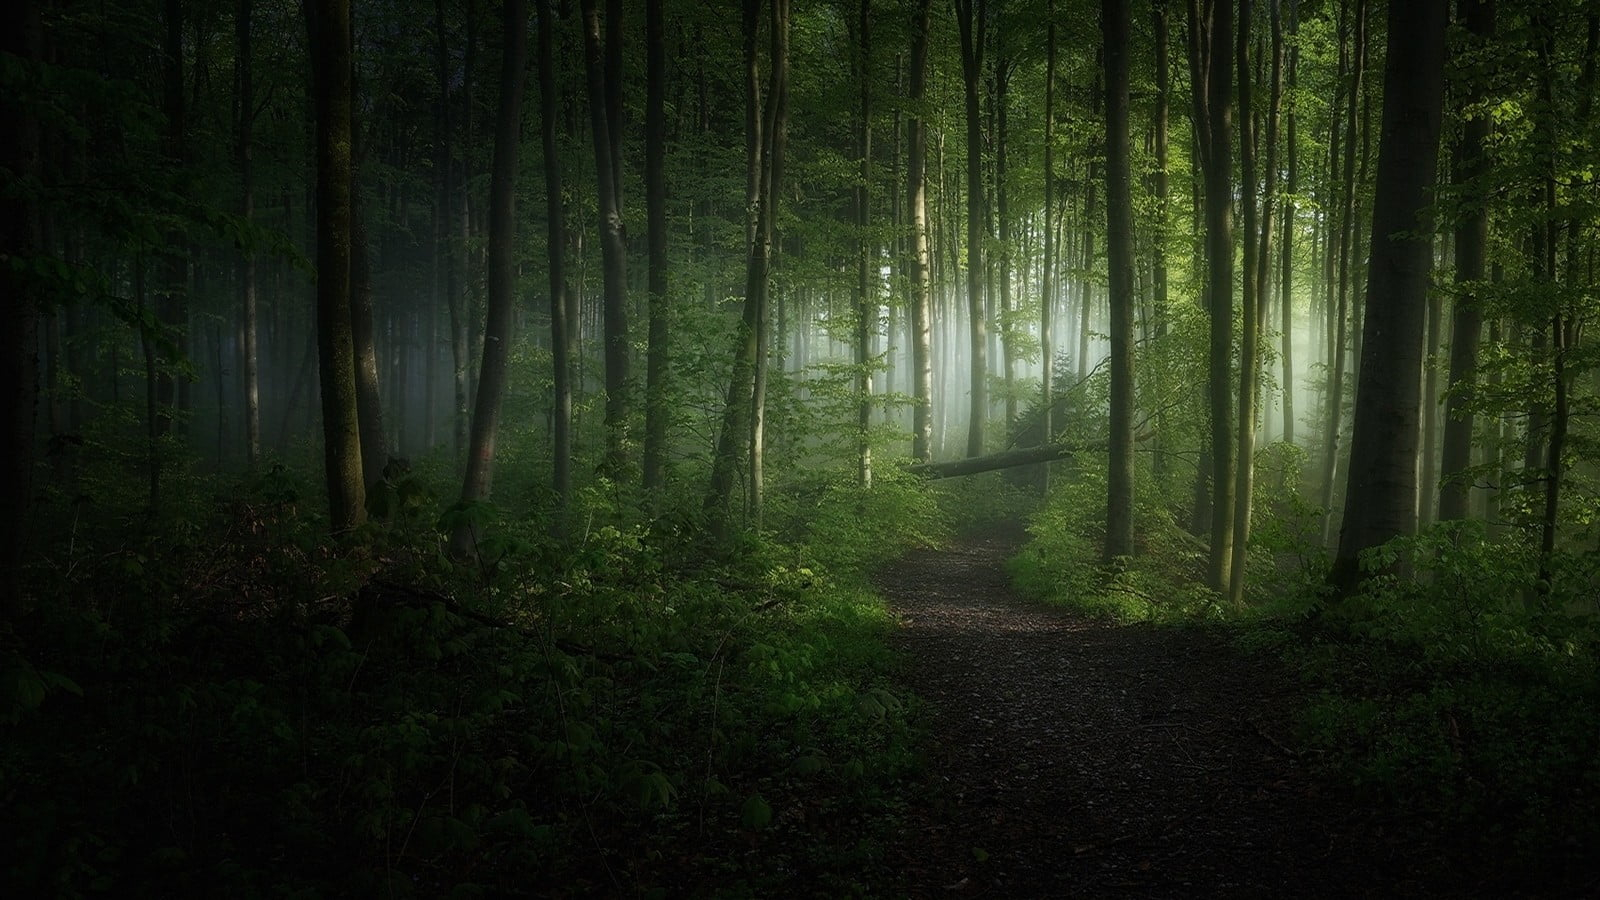 Green leafed trees wallpaper, nature, landscape, morning, forest, path